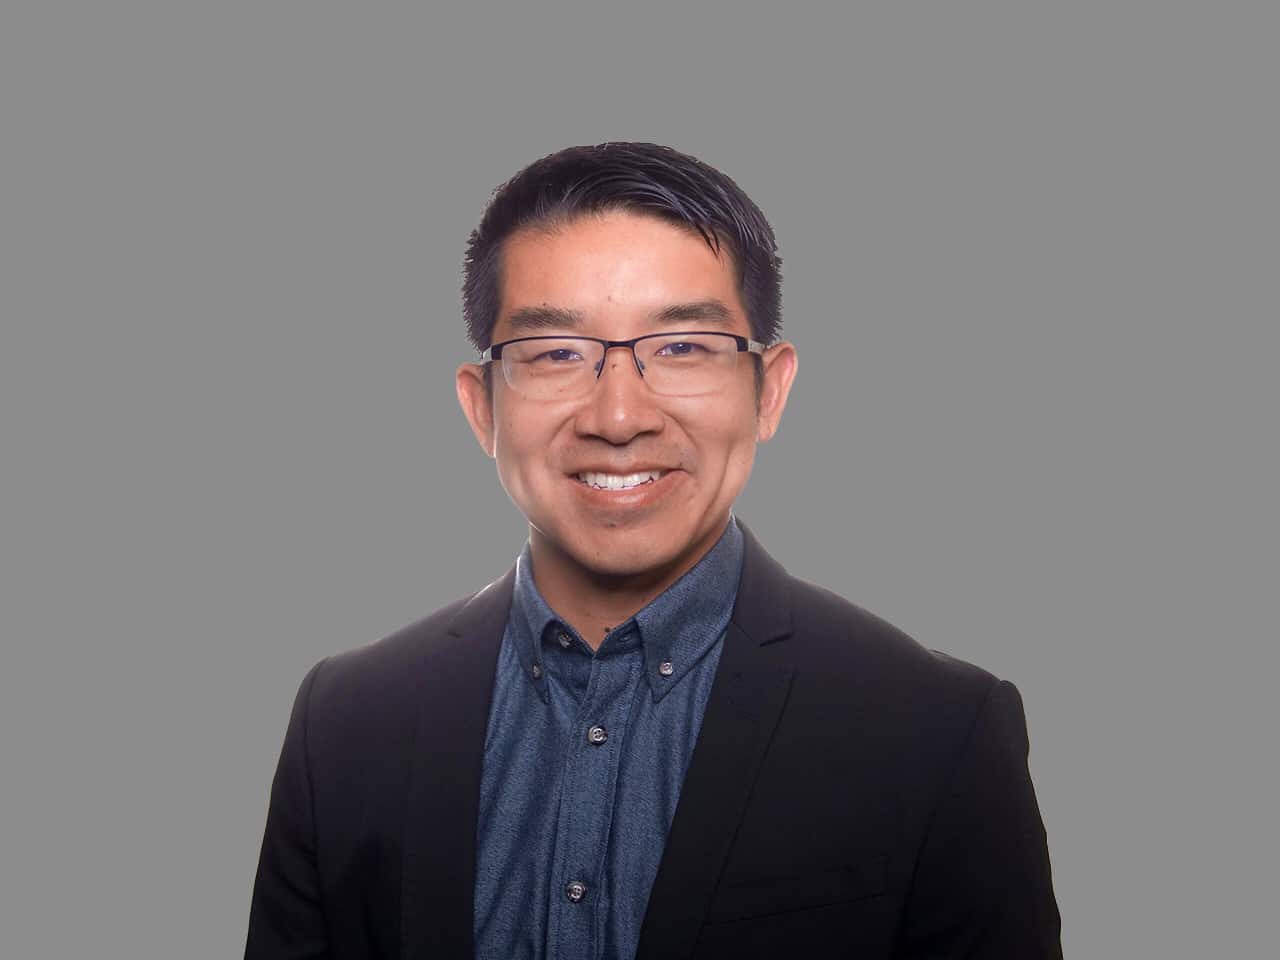 Frank Zhang, Co-Founder / Chief Financial Officer, Crete Mechanical Group